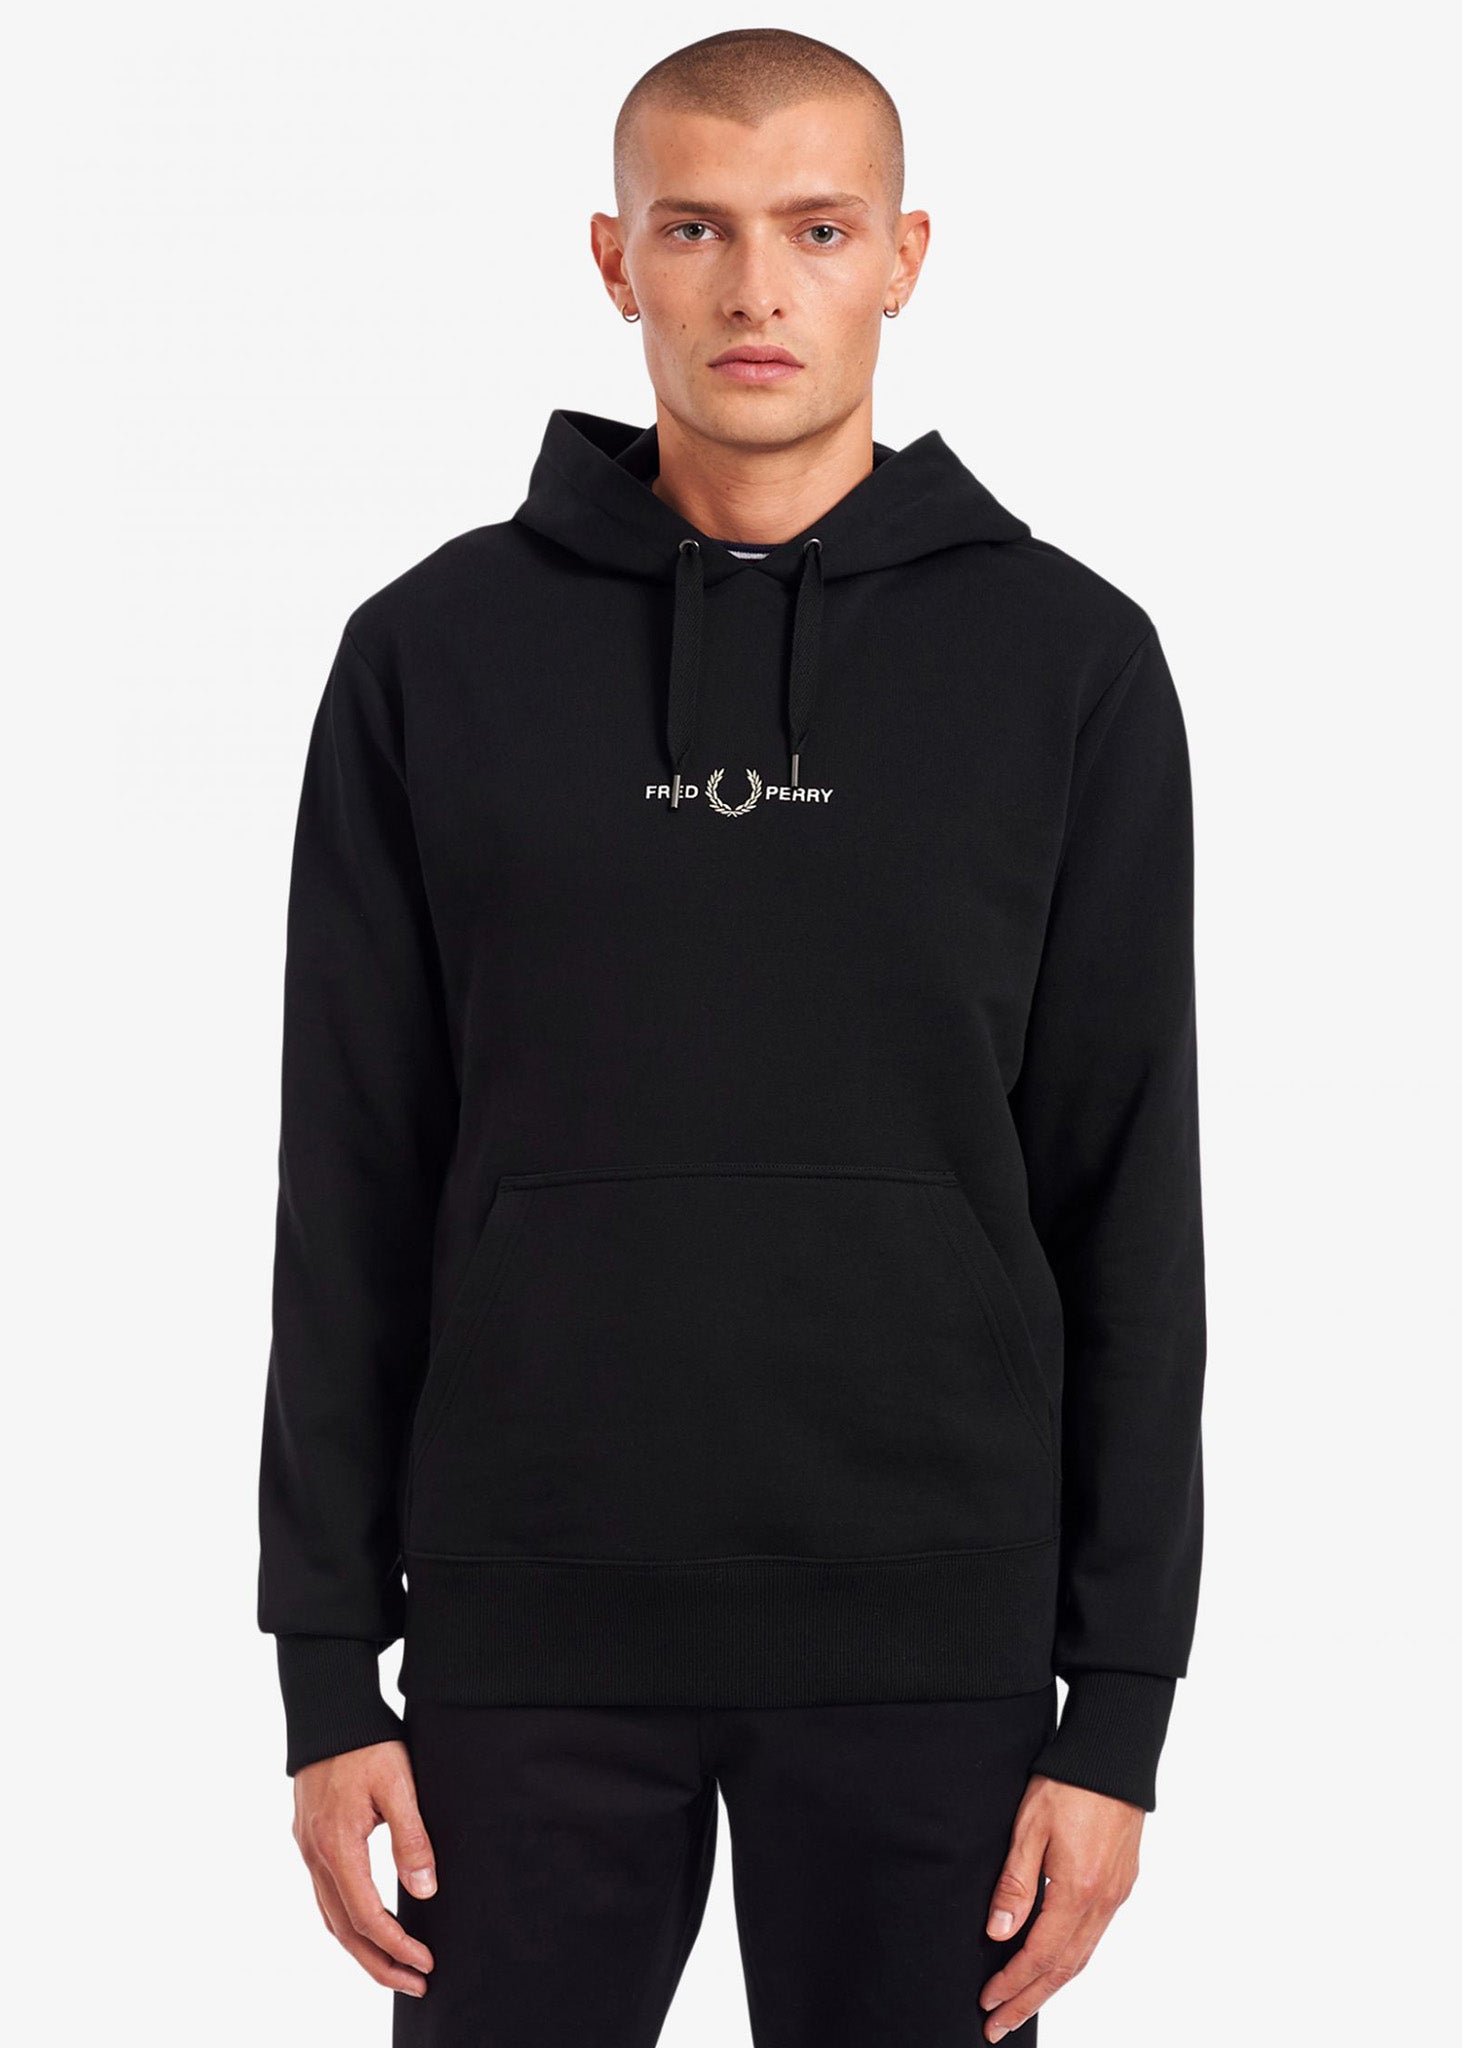 Fred Perry embroidered hooded sweatshirt zwart